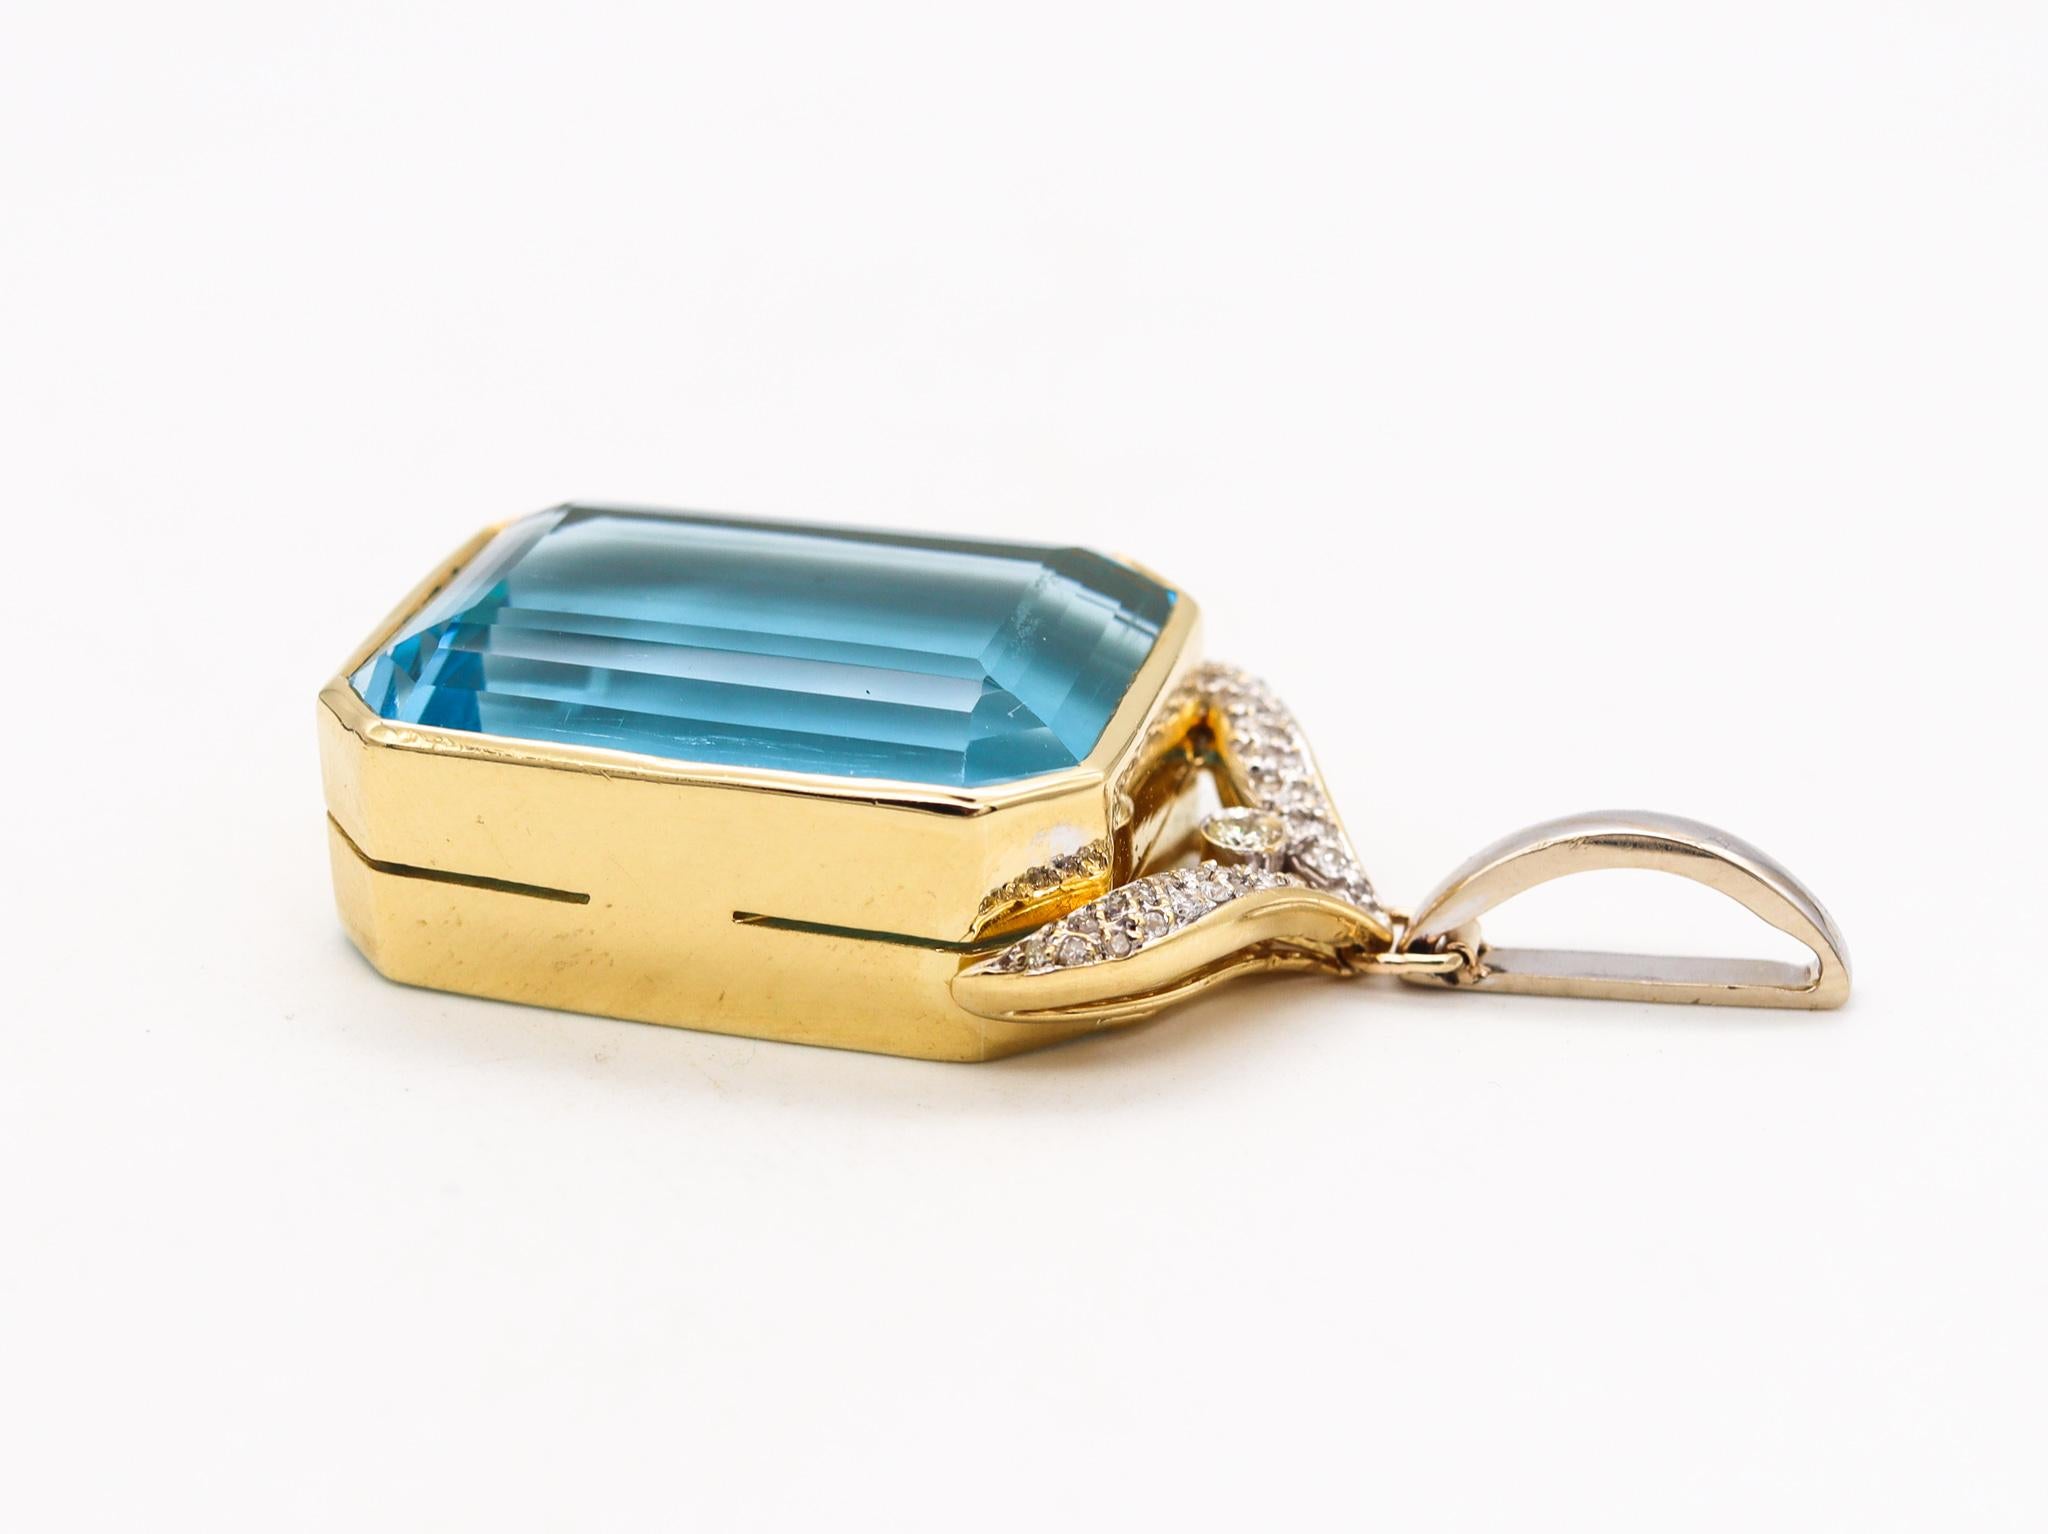 Contemporary Large Pendant In 18Kt Gold With 72.06 Ctw In Aquamarine & Diamonds In Excellent Condition For Sale In Miami, FL